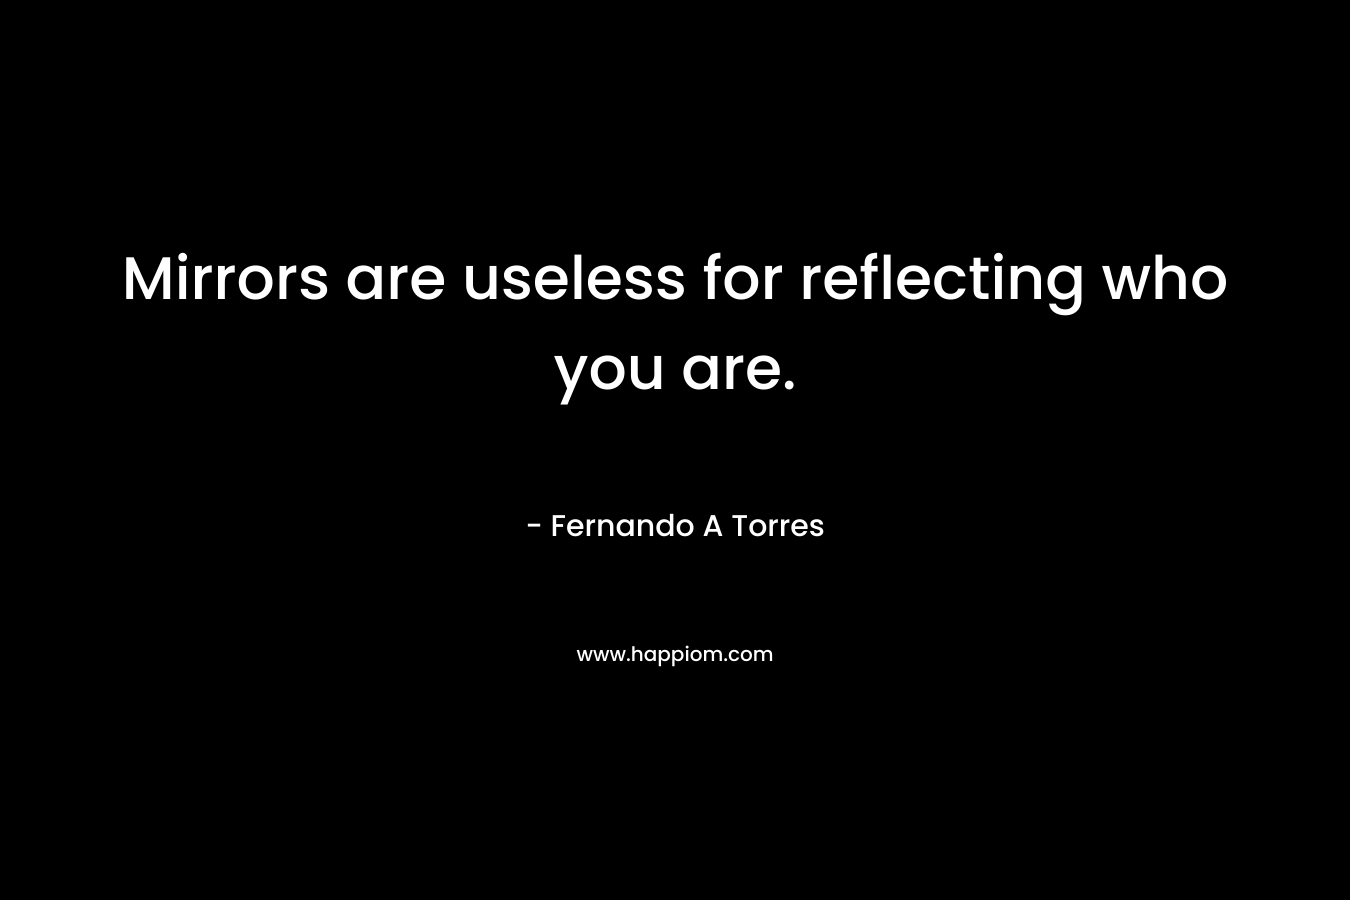 Mirrors are useless for reflecting who you are.